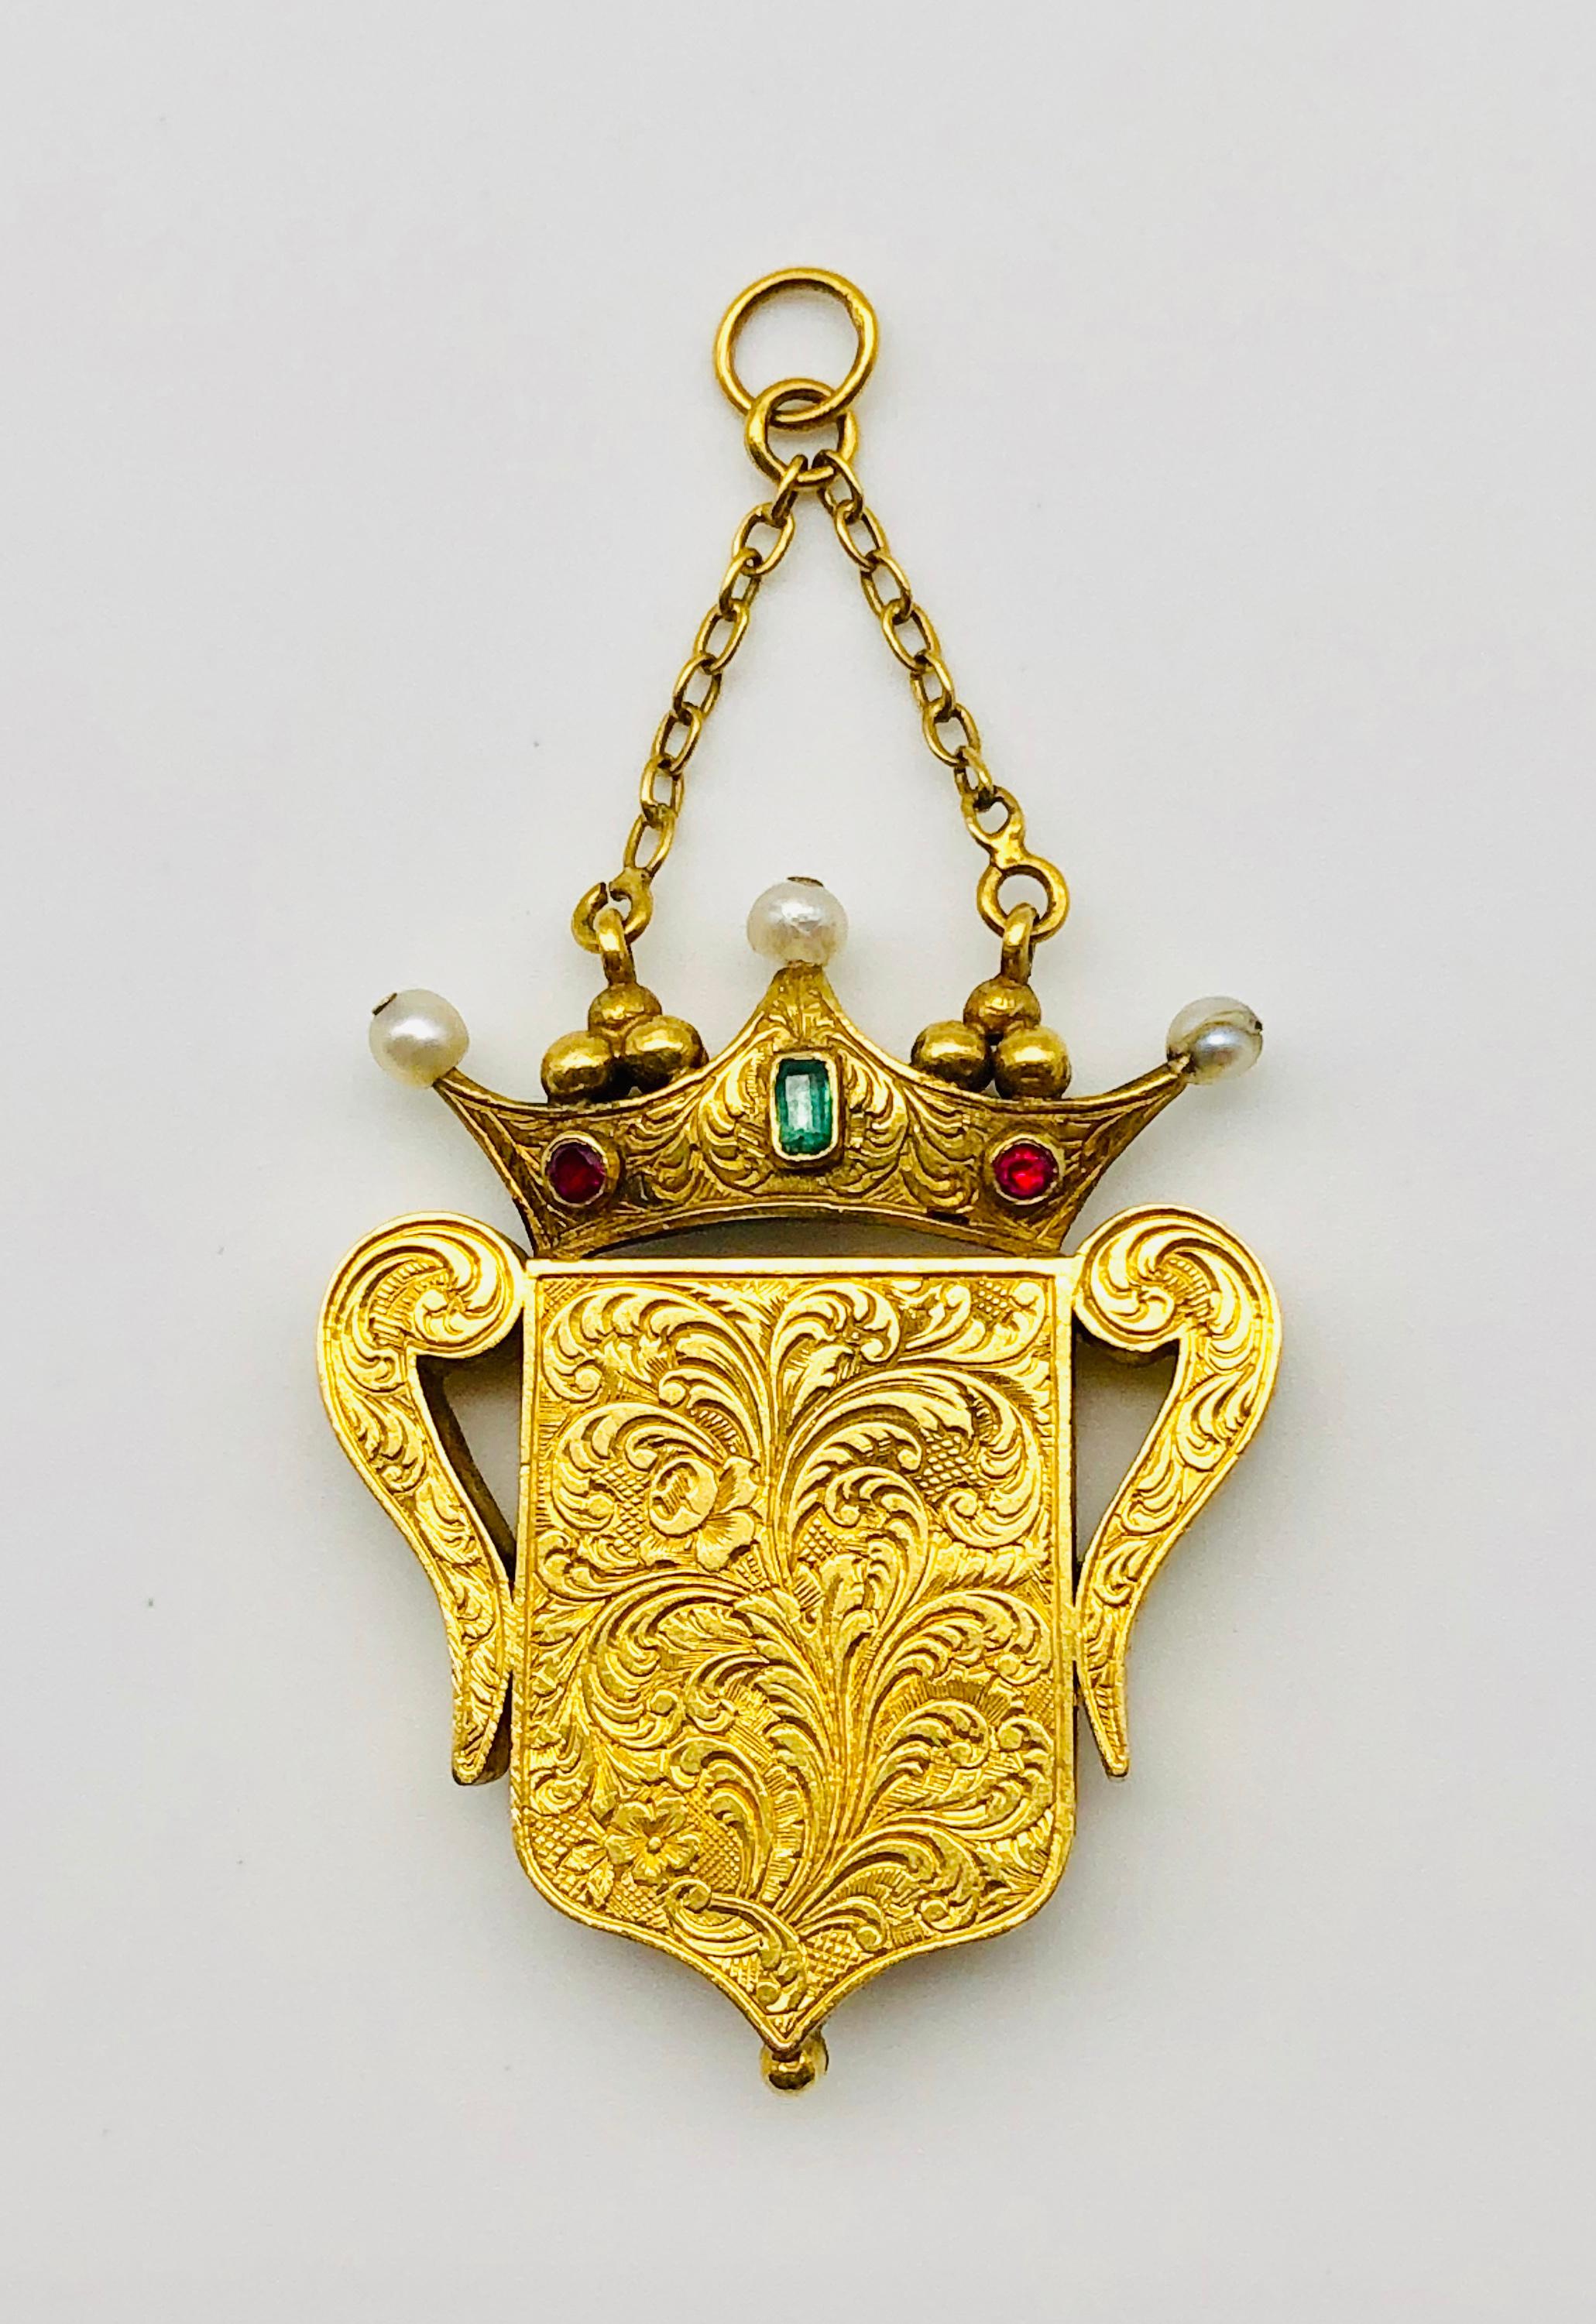 Very exquisite vinaigrette in the shape of a shield decorated with a forget-me-not set with turquoises. From two chains a crown is suspended that holds the vinaigrette. The three jagged crown is decorated with orient pearls, four rubies and two